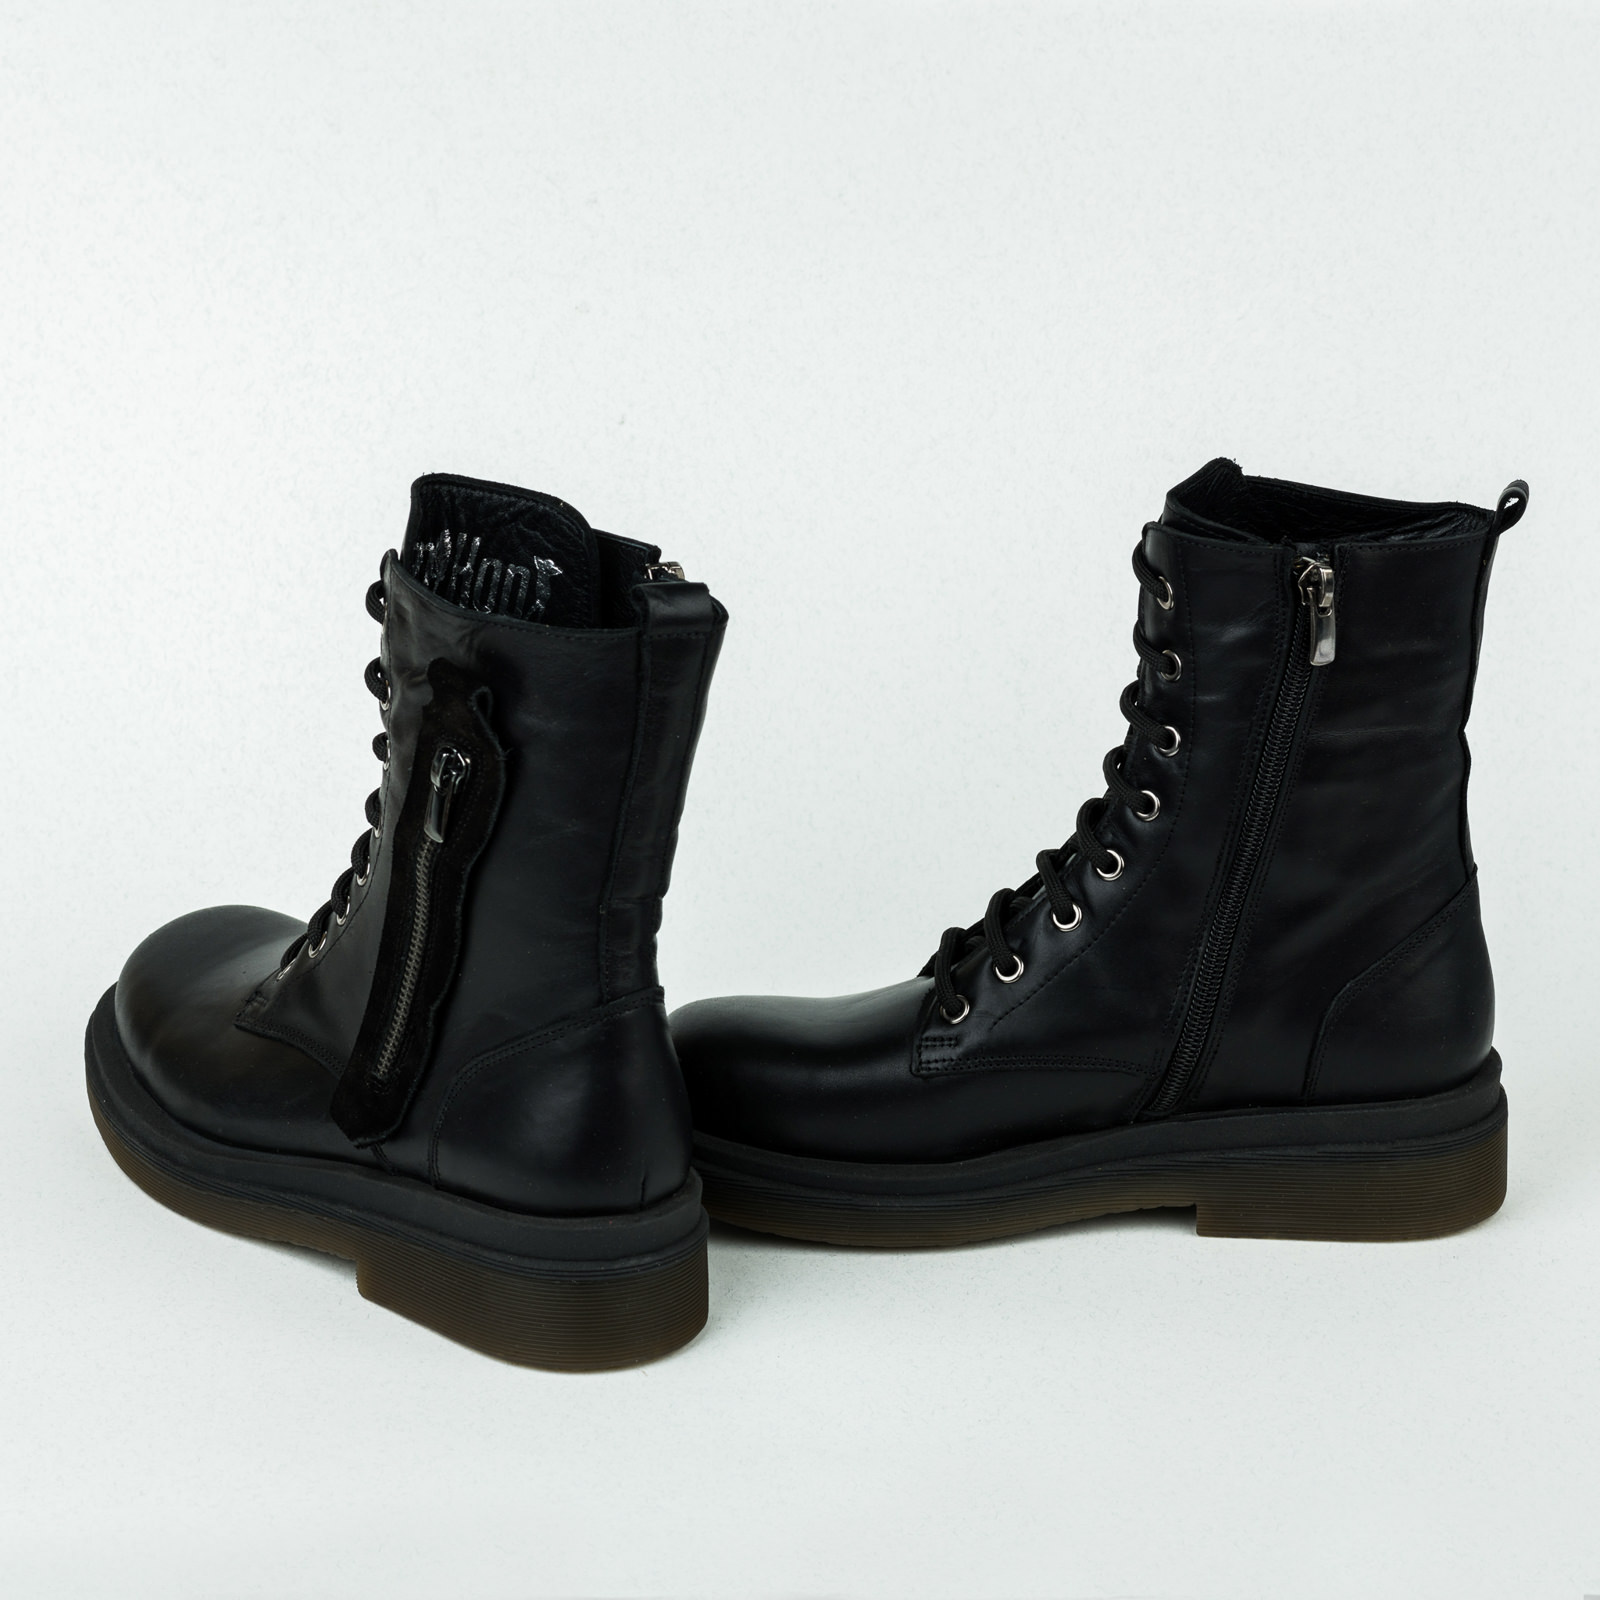 Leather ankle boots B058 - BLACK